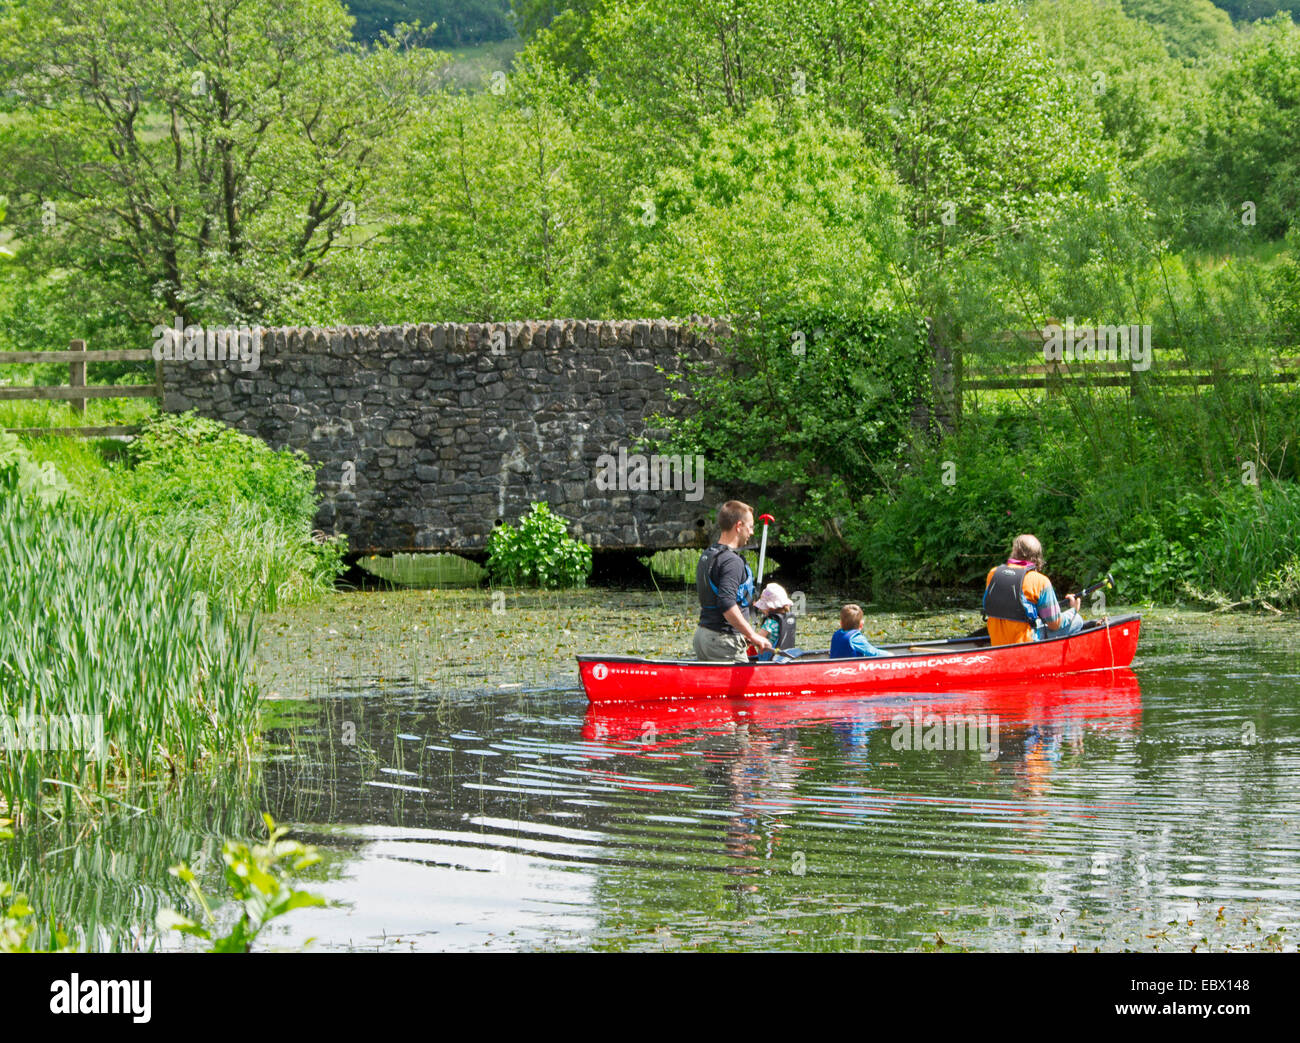 Family in bright red canoe paddling on lake surrounded by emerald vegetation & tall trees in National Botanic Gardens of Wales Stock Photo